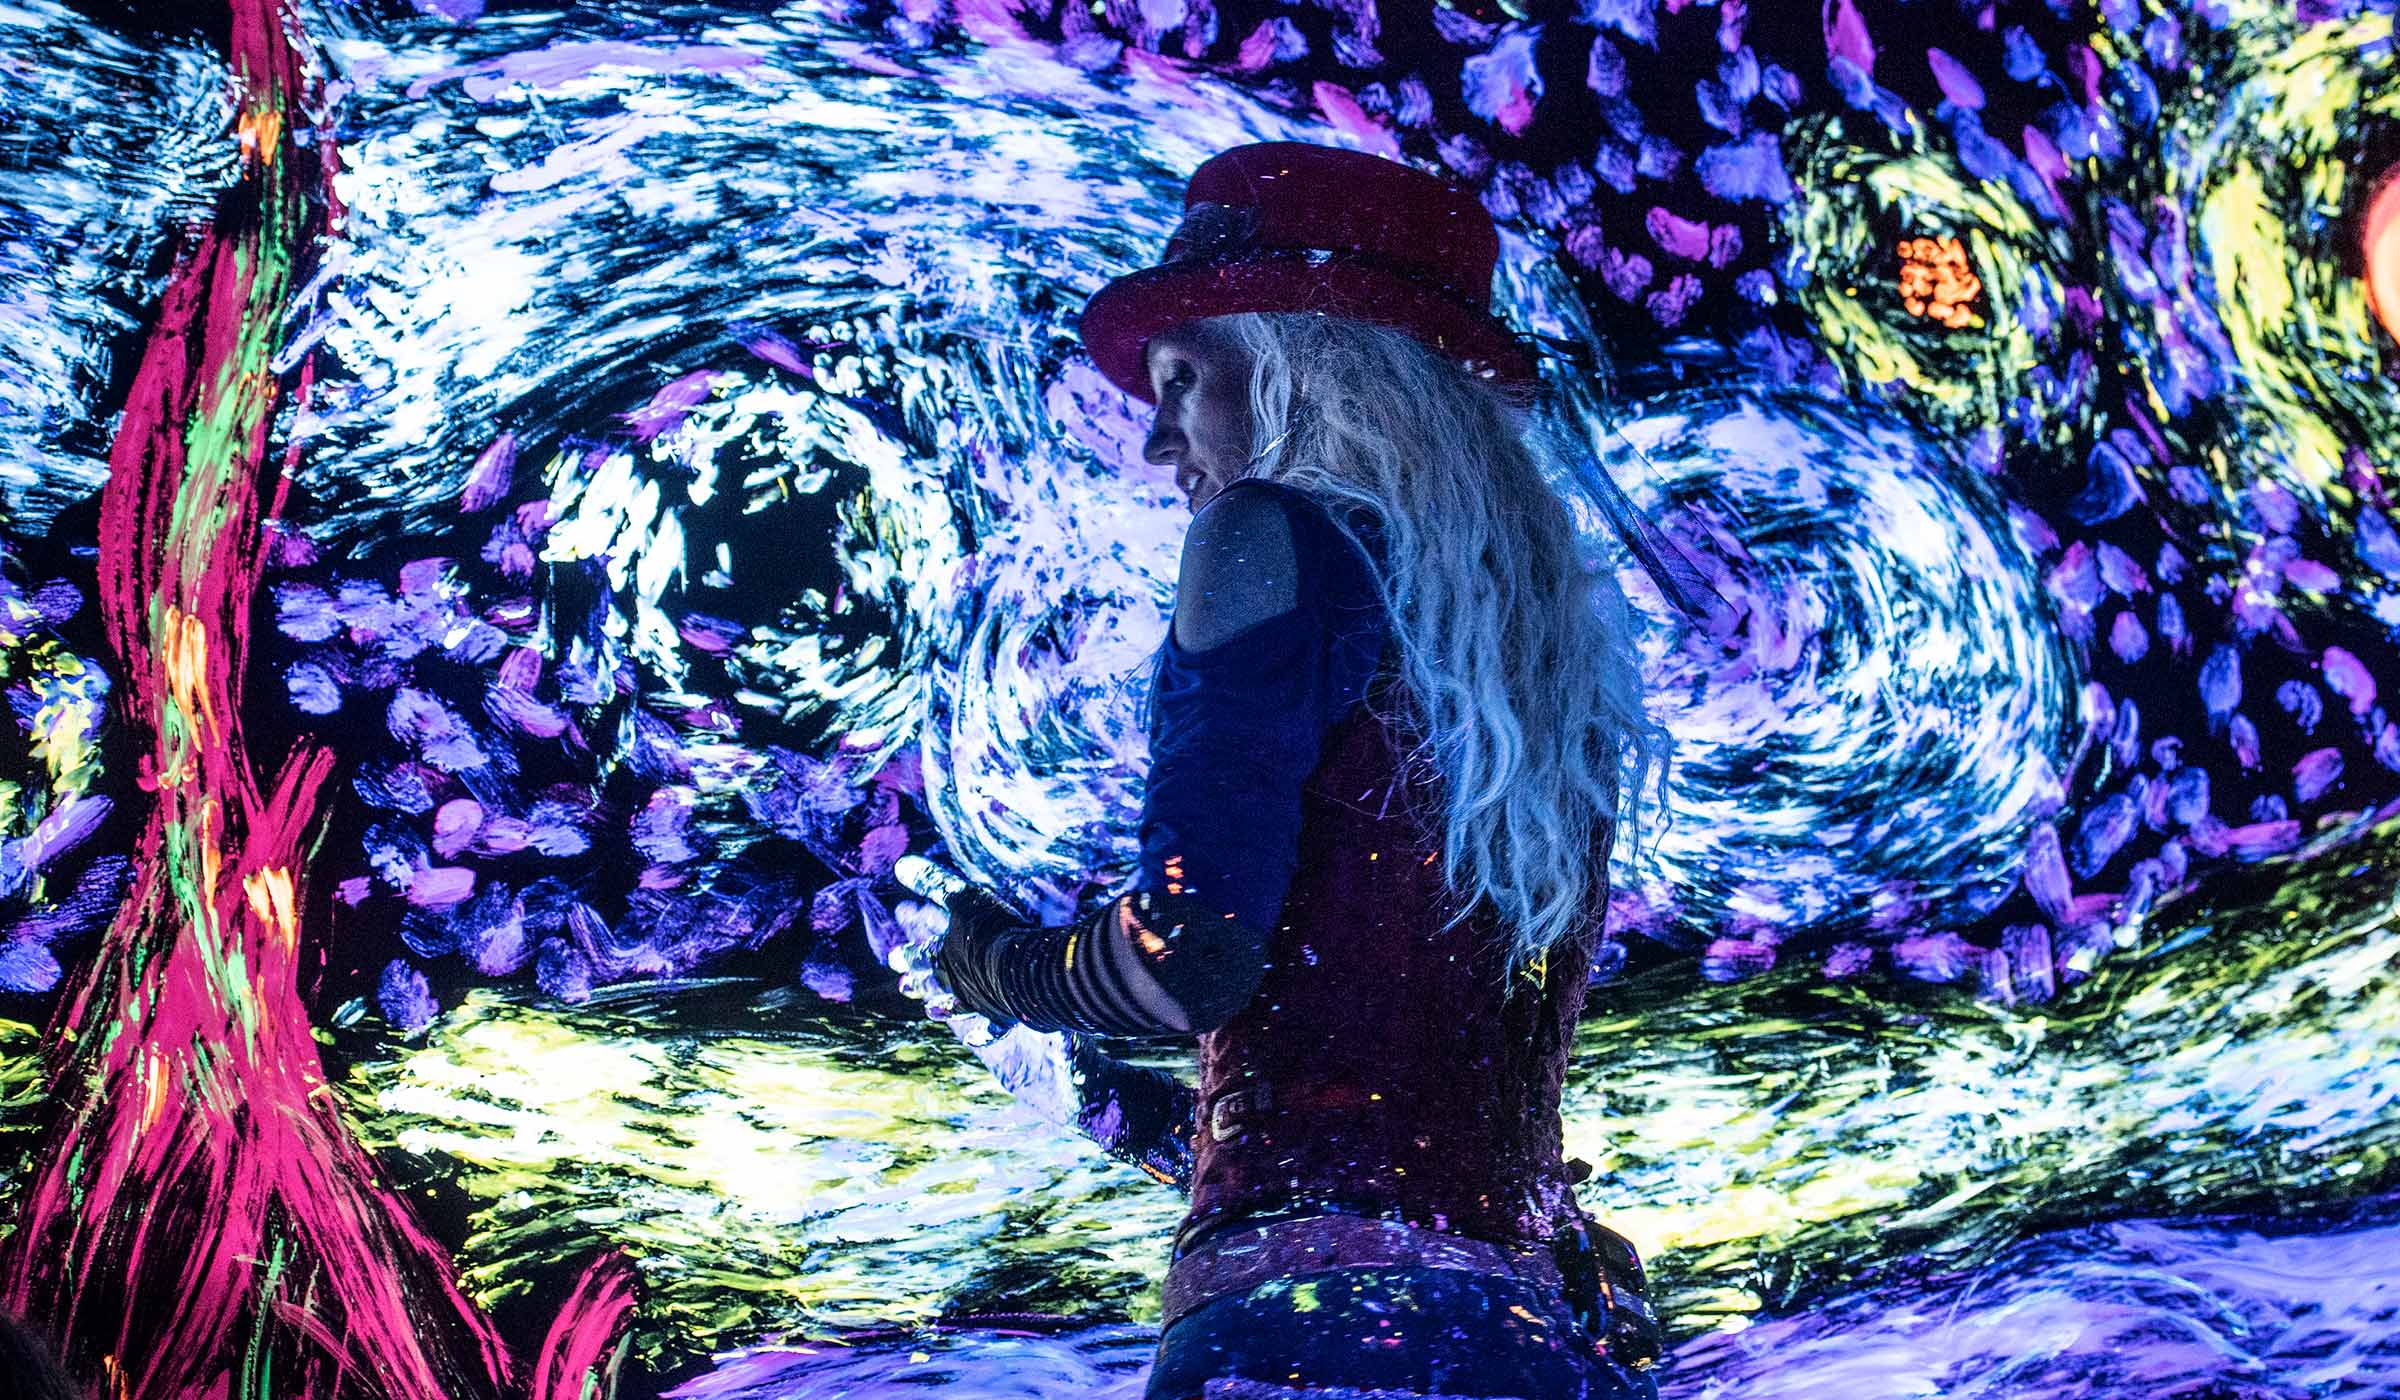 Lit by glowing blaclights, the female Artrageous lead performer uses her hands to add glowing paint to a canvas covered with a a swirly sky painting.